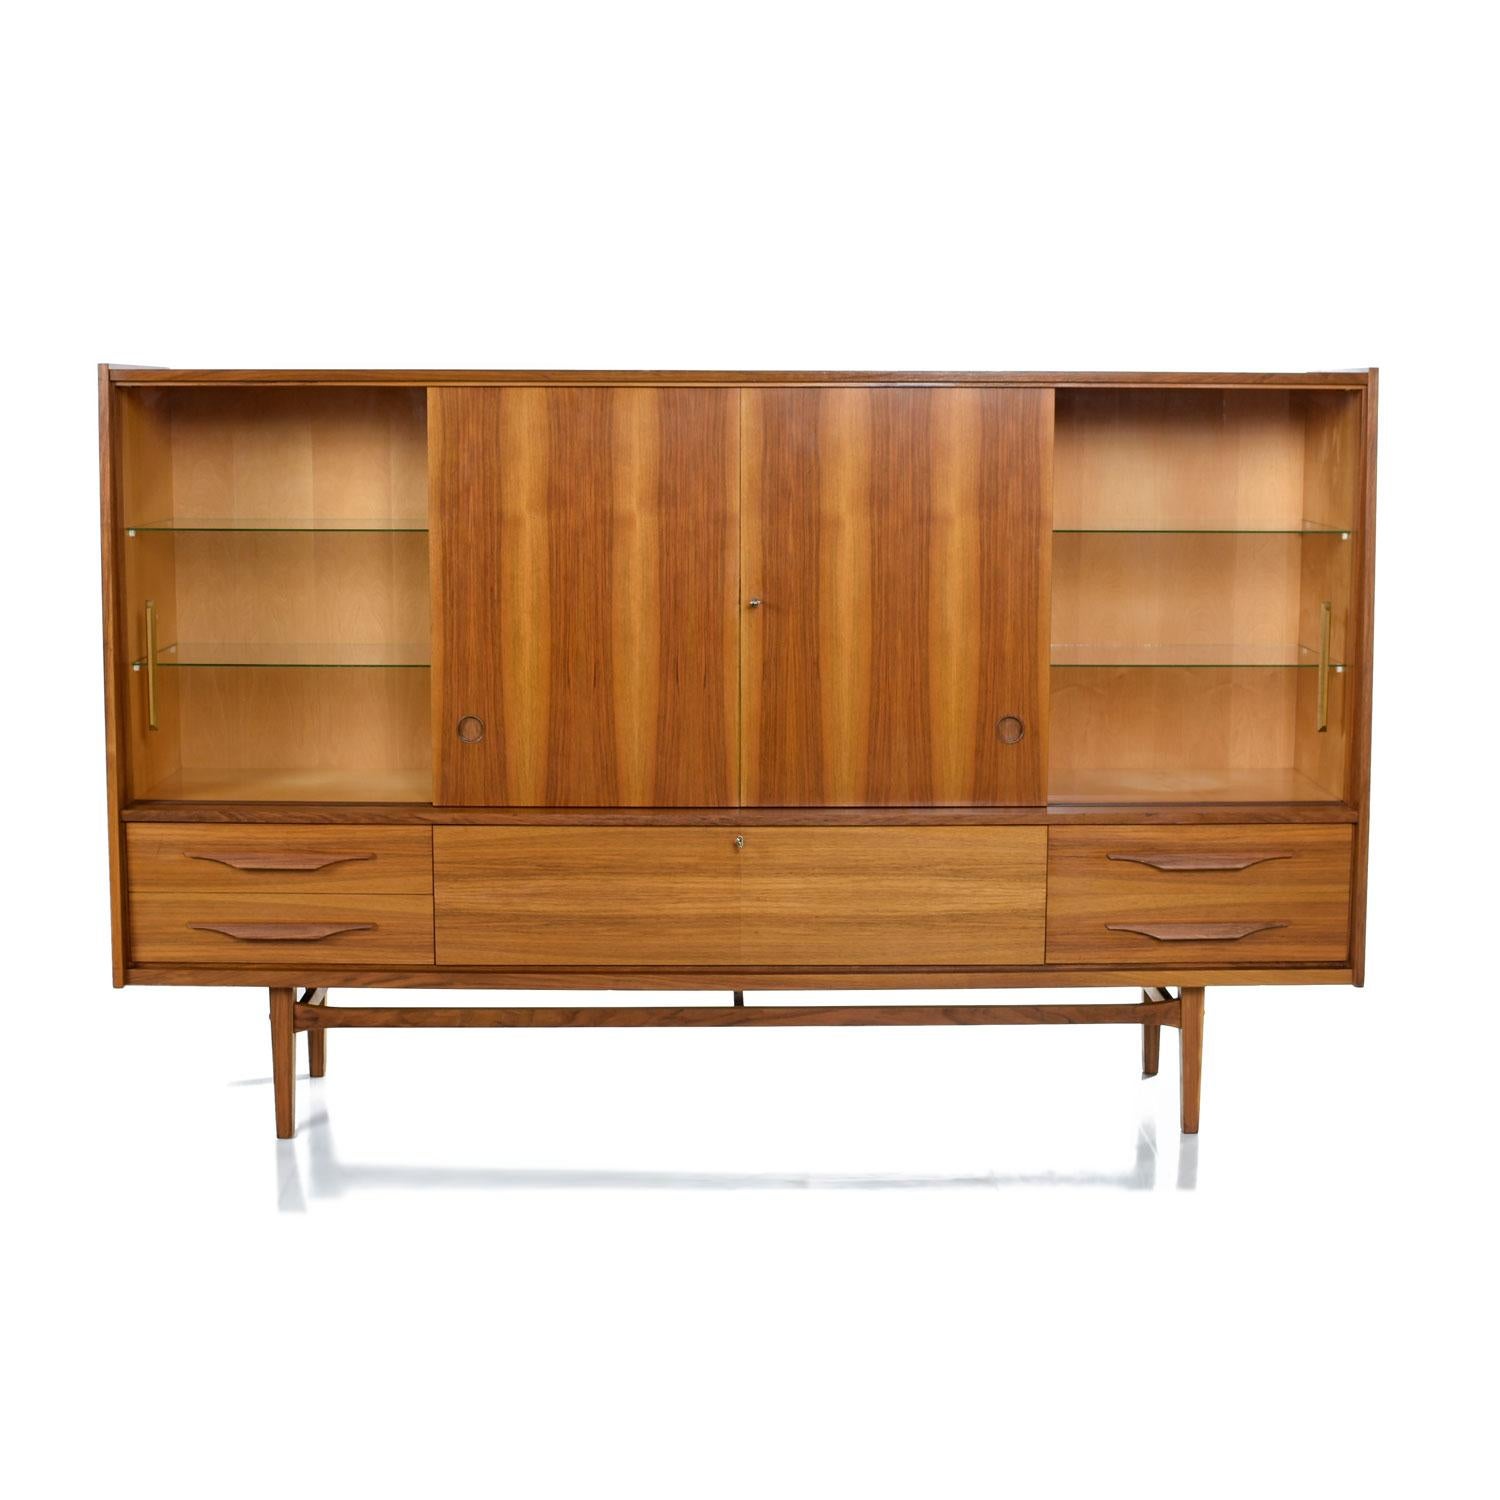 This is not a typical Rockabilly German Shrunk cabinet. This piece, although authentically German, is clearly Scandinavian inspired. The most obvious Danish aspect is the old growth, heartwood teak. Fiery cathedral grain can only be found in vintage